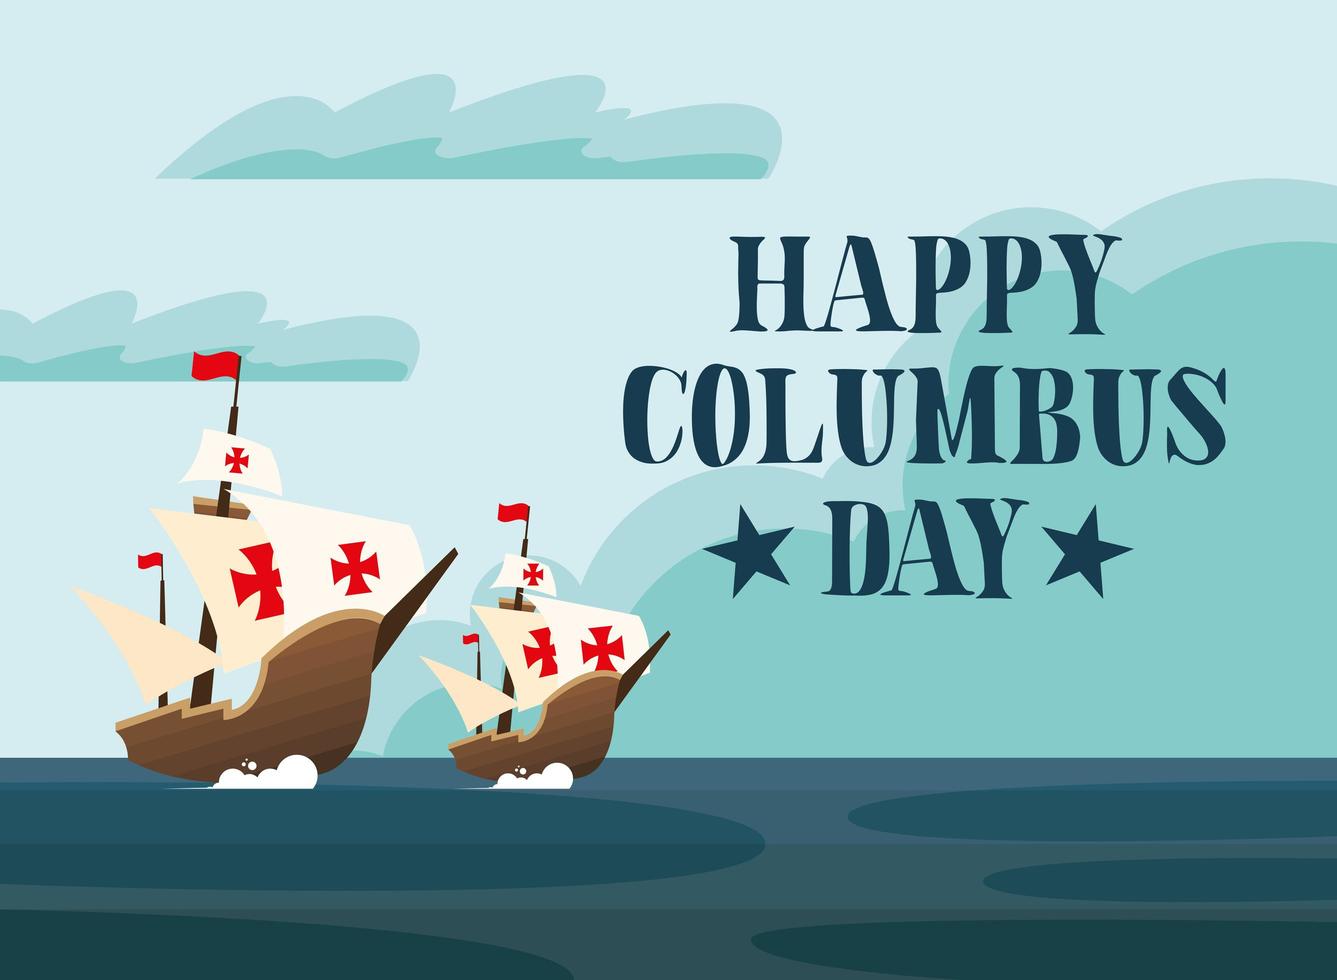 Ships for happy Columbus day celebration vector